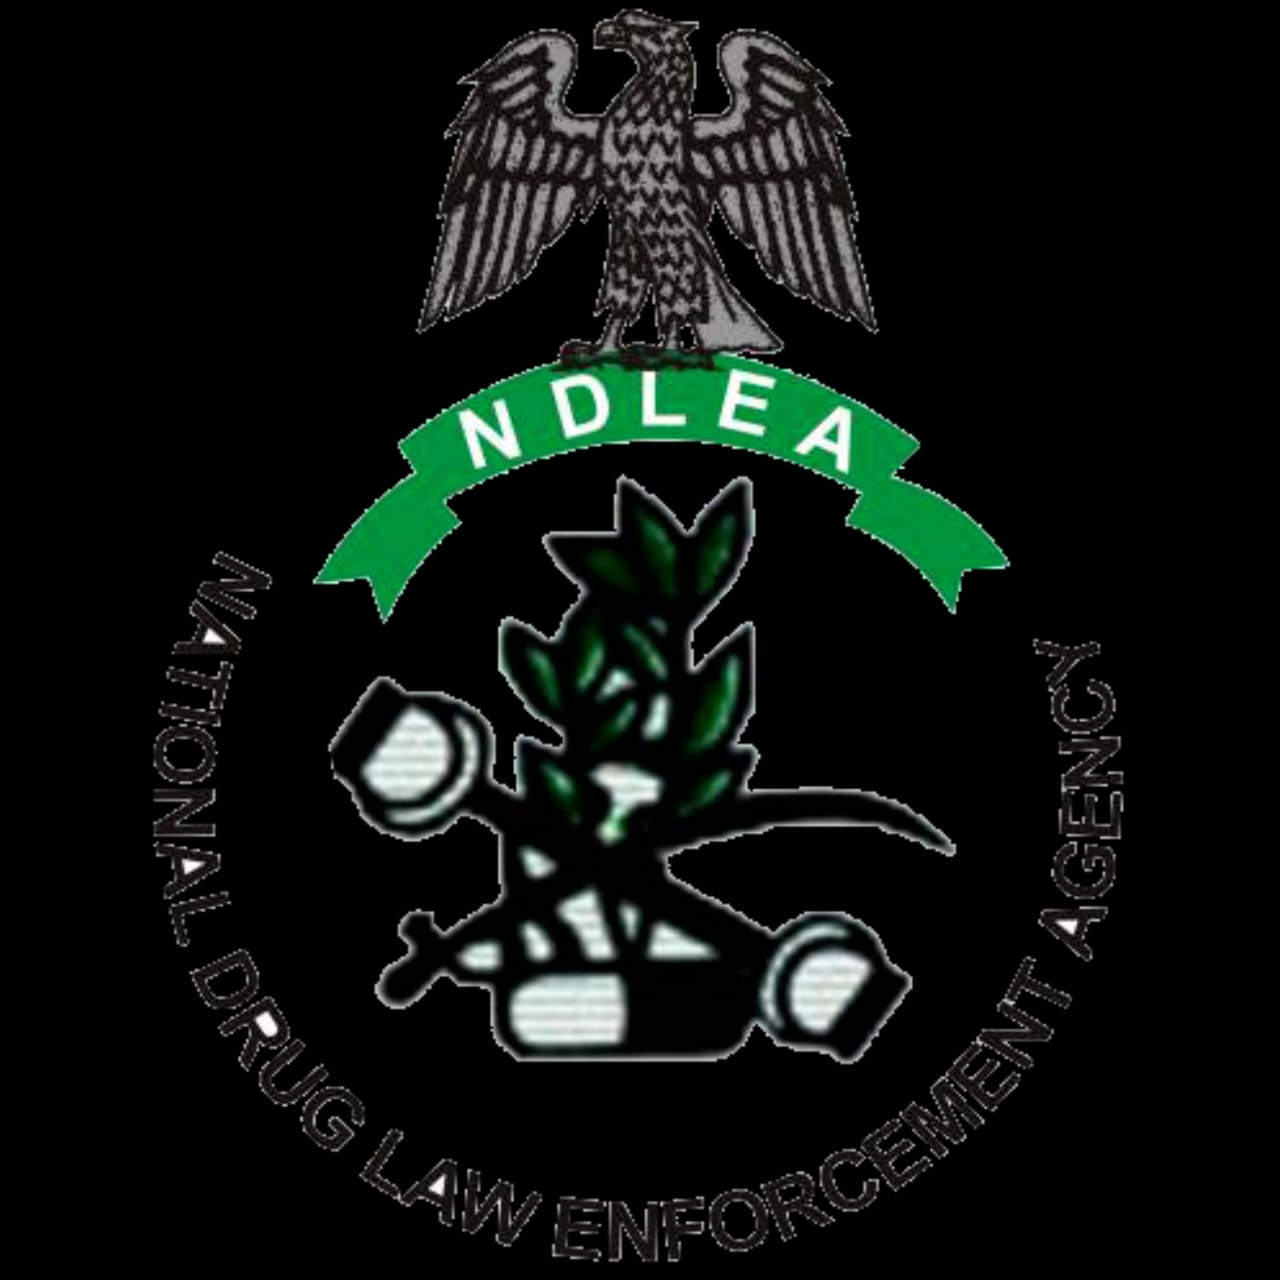 NDLEA bursts drug abuse competition at wedding party arrests groom, 25 others